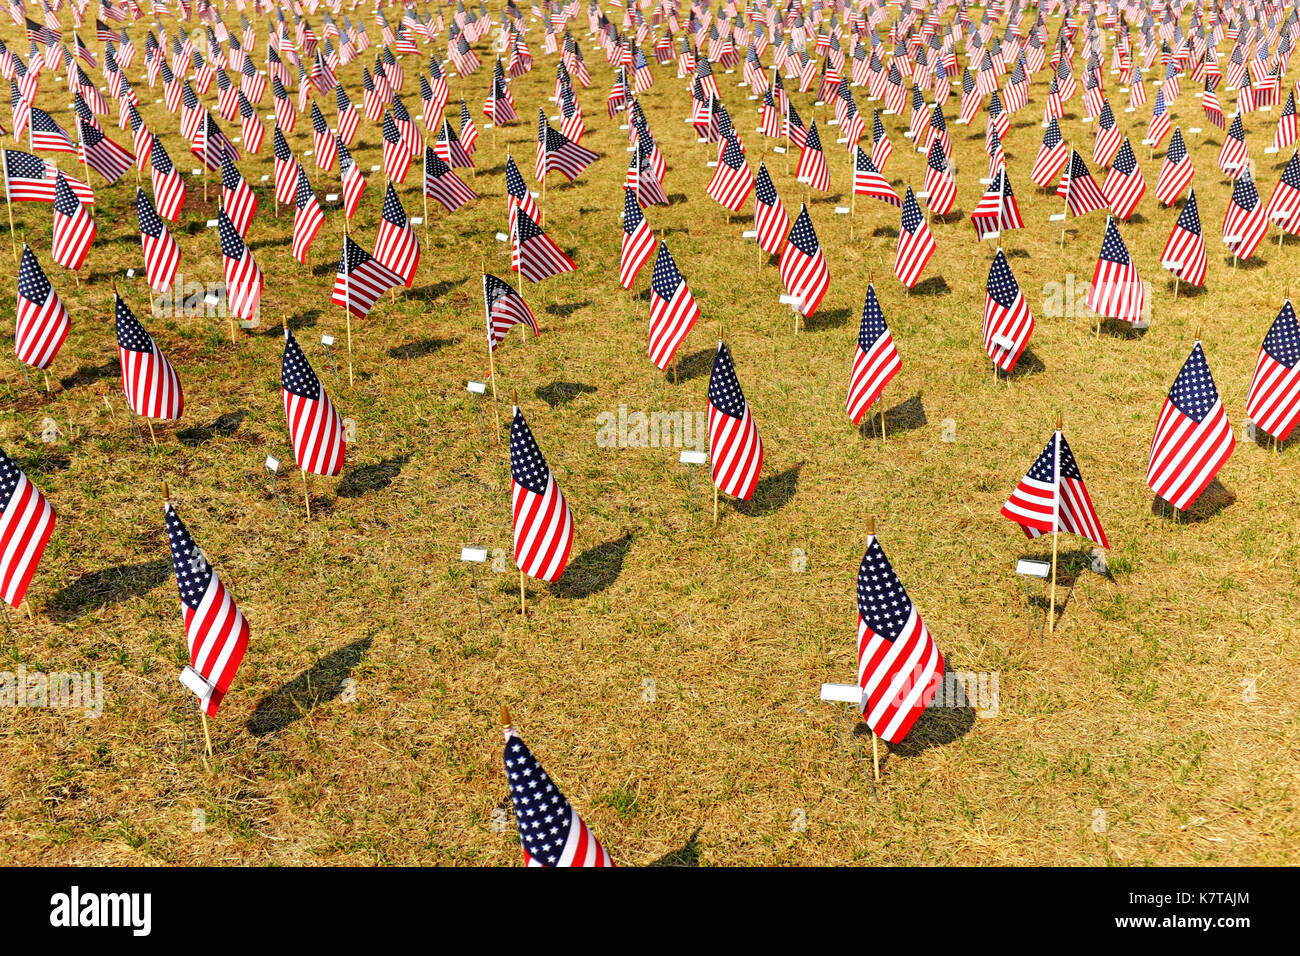 Dozens of USA flags are planted in rows outside the Cleveland FirstEnergy Football Stadium on opening day 2017. Stock Photo